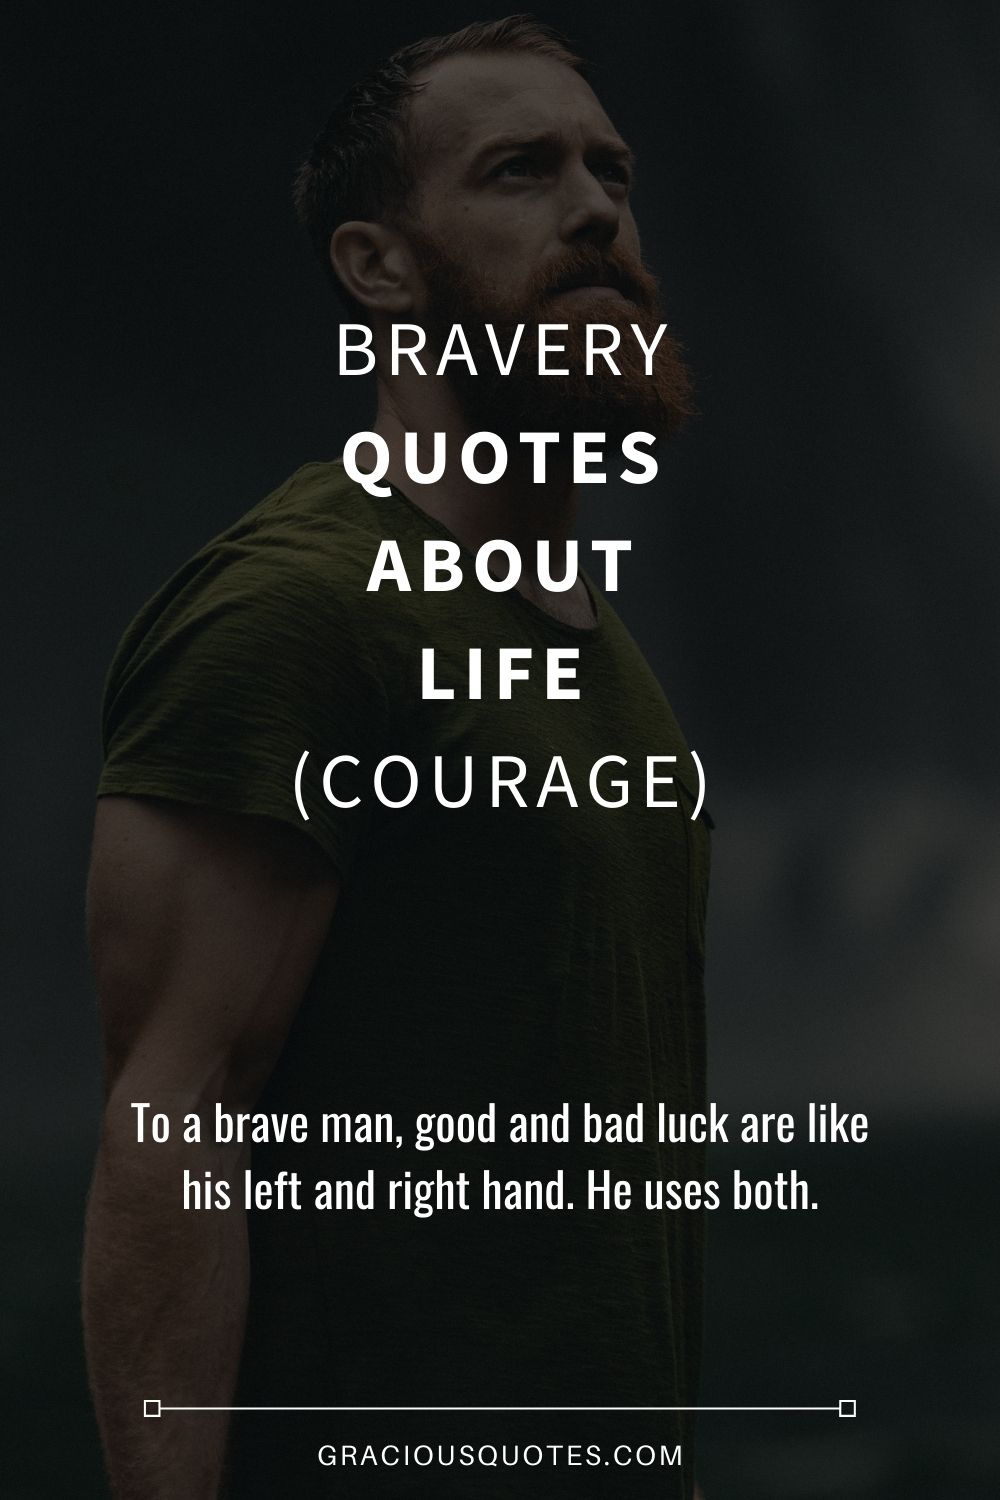 Bravery Quotes About Life (COURAGE) - Gracious Quotes